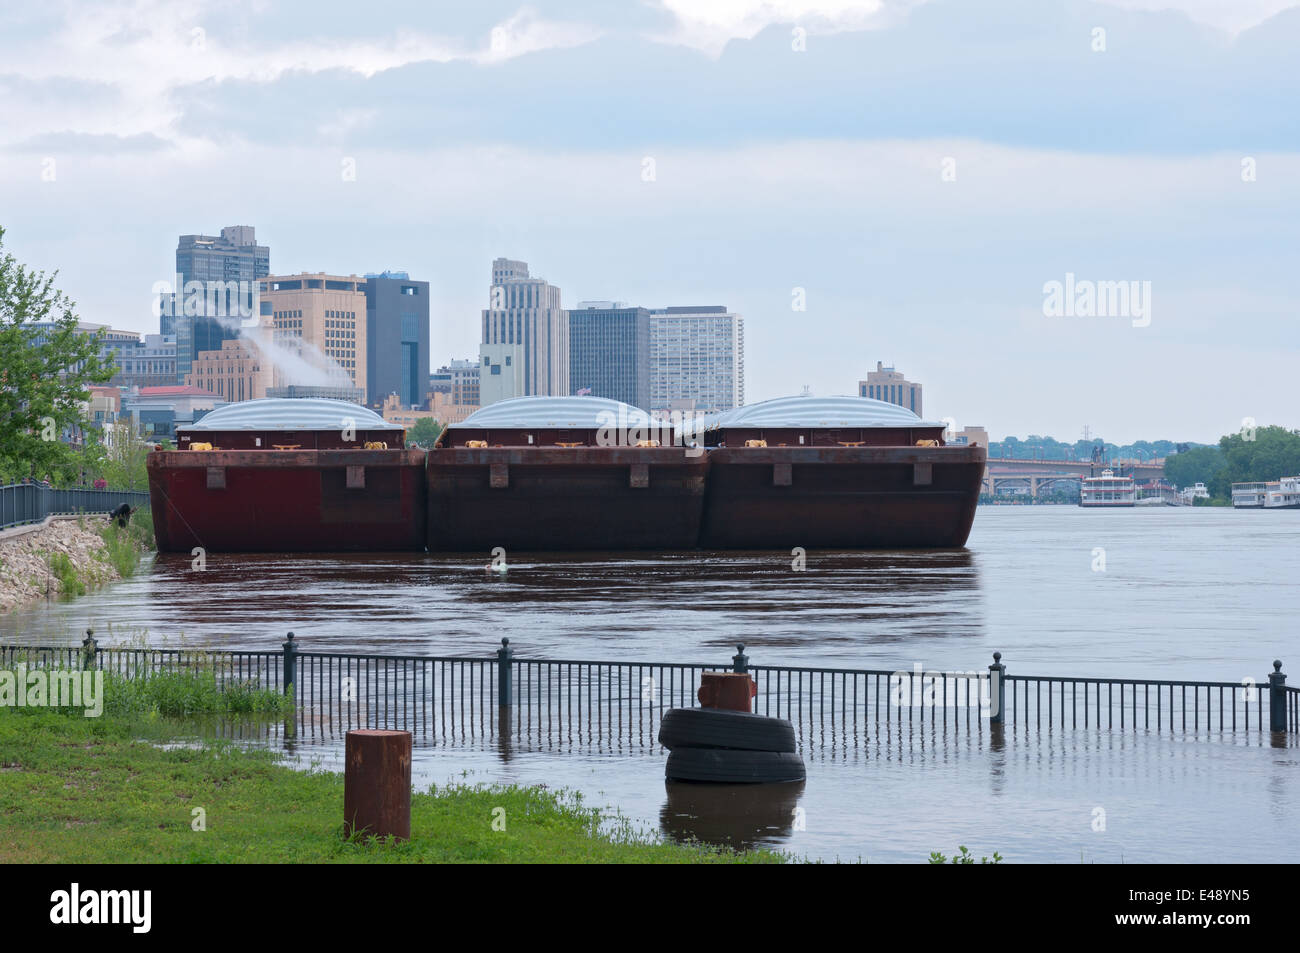 barges lined up on flooded banks of mississippi river in downtown saint paul minnesota Stock Photo